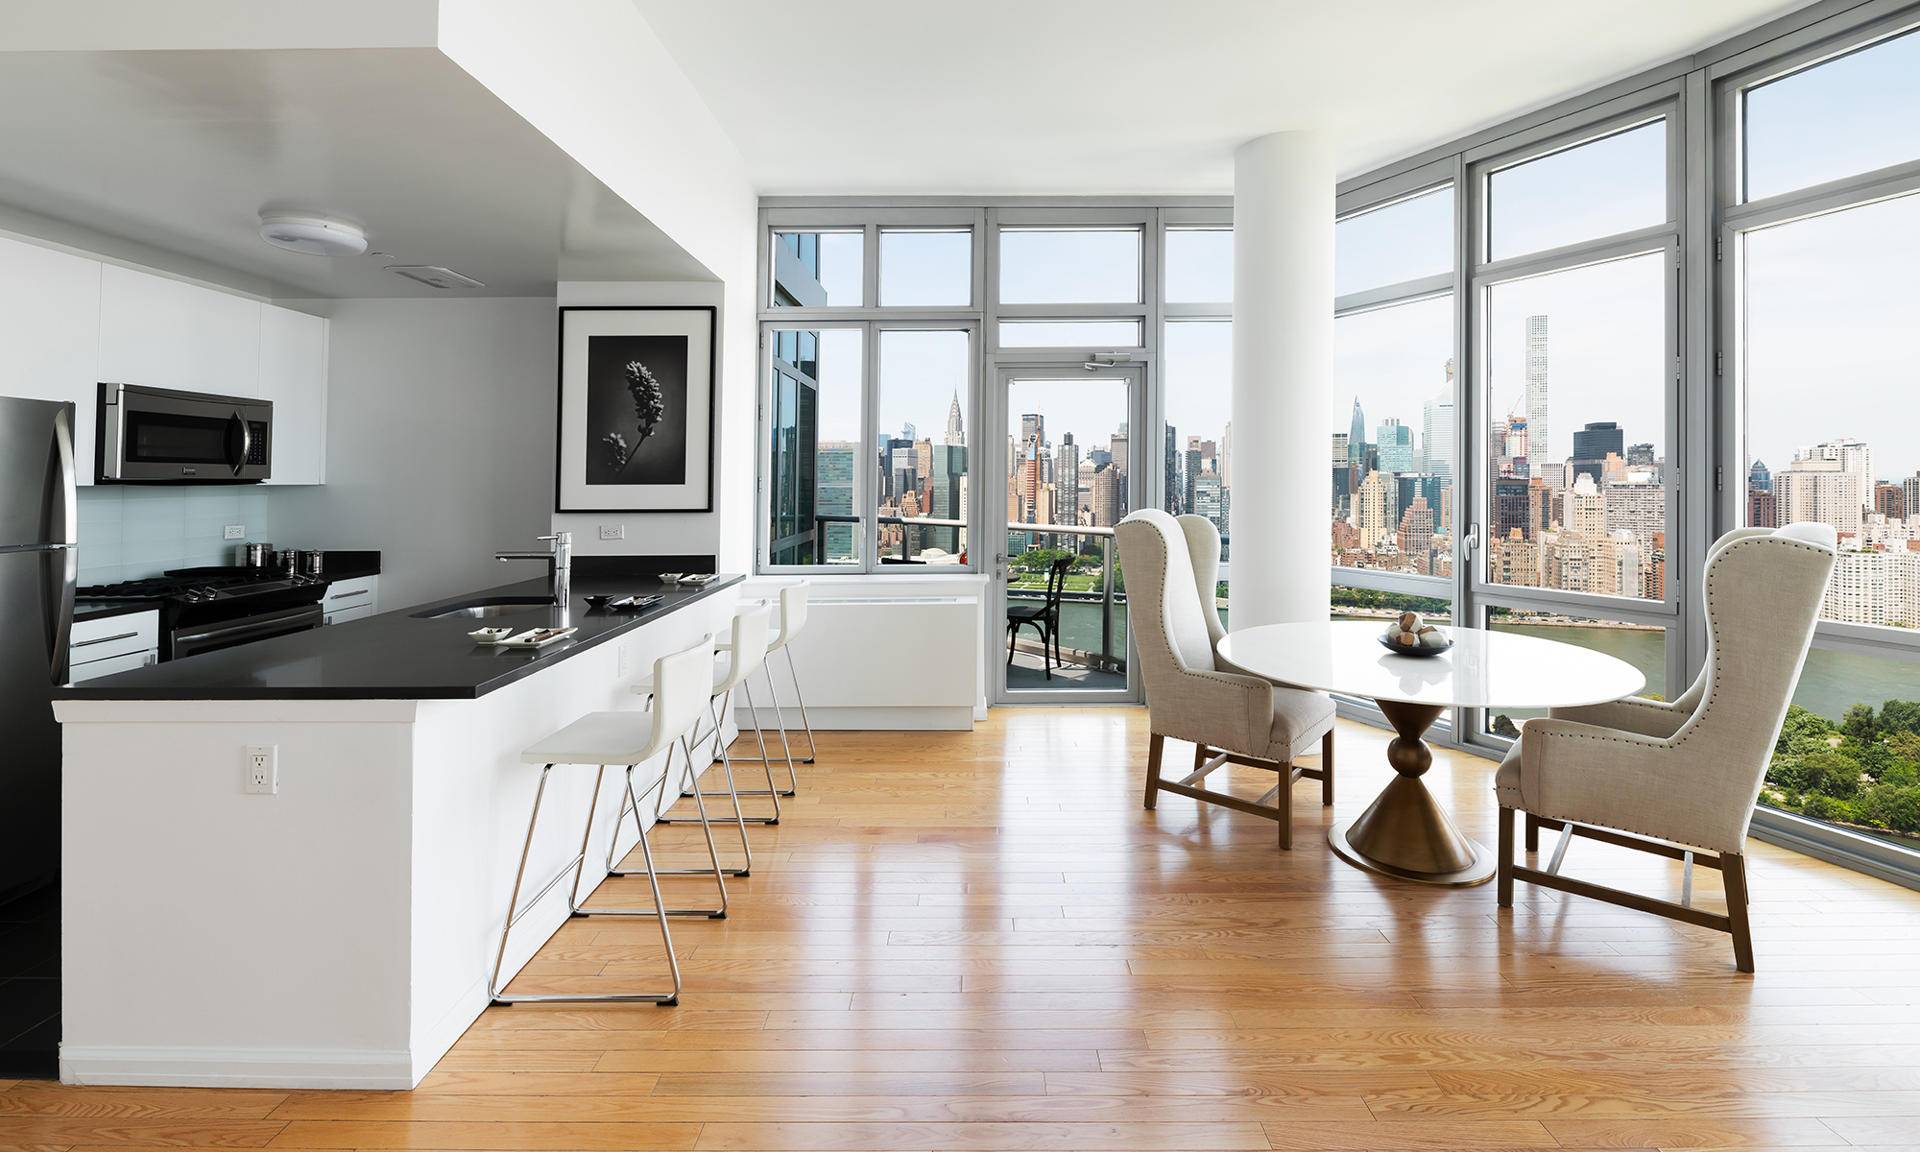 Stunning 1 Bedroom Apt w/ Private Balcony in Luxurious LIC Building